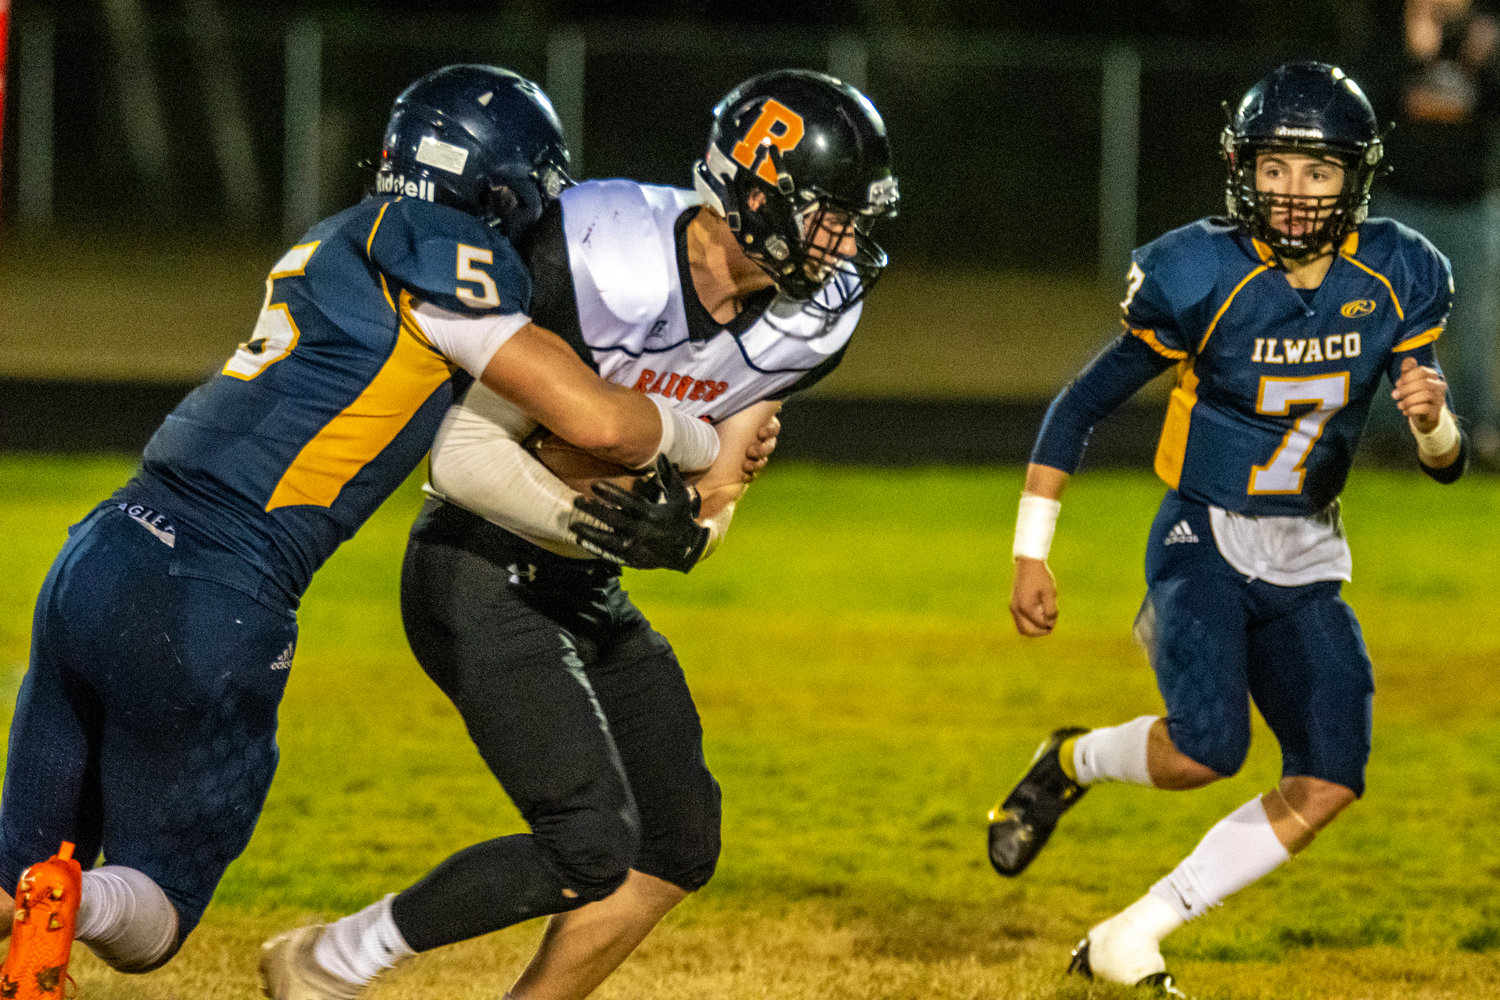 Rainier's John Kenney looks to break a tackle after hauling in a pass during a road game against Ilwaco on Sept. 30.